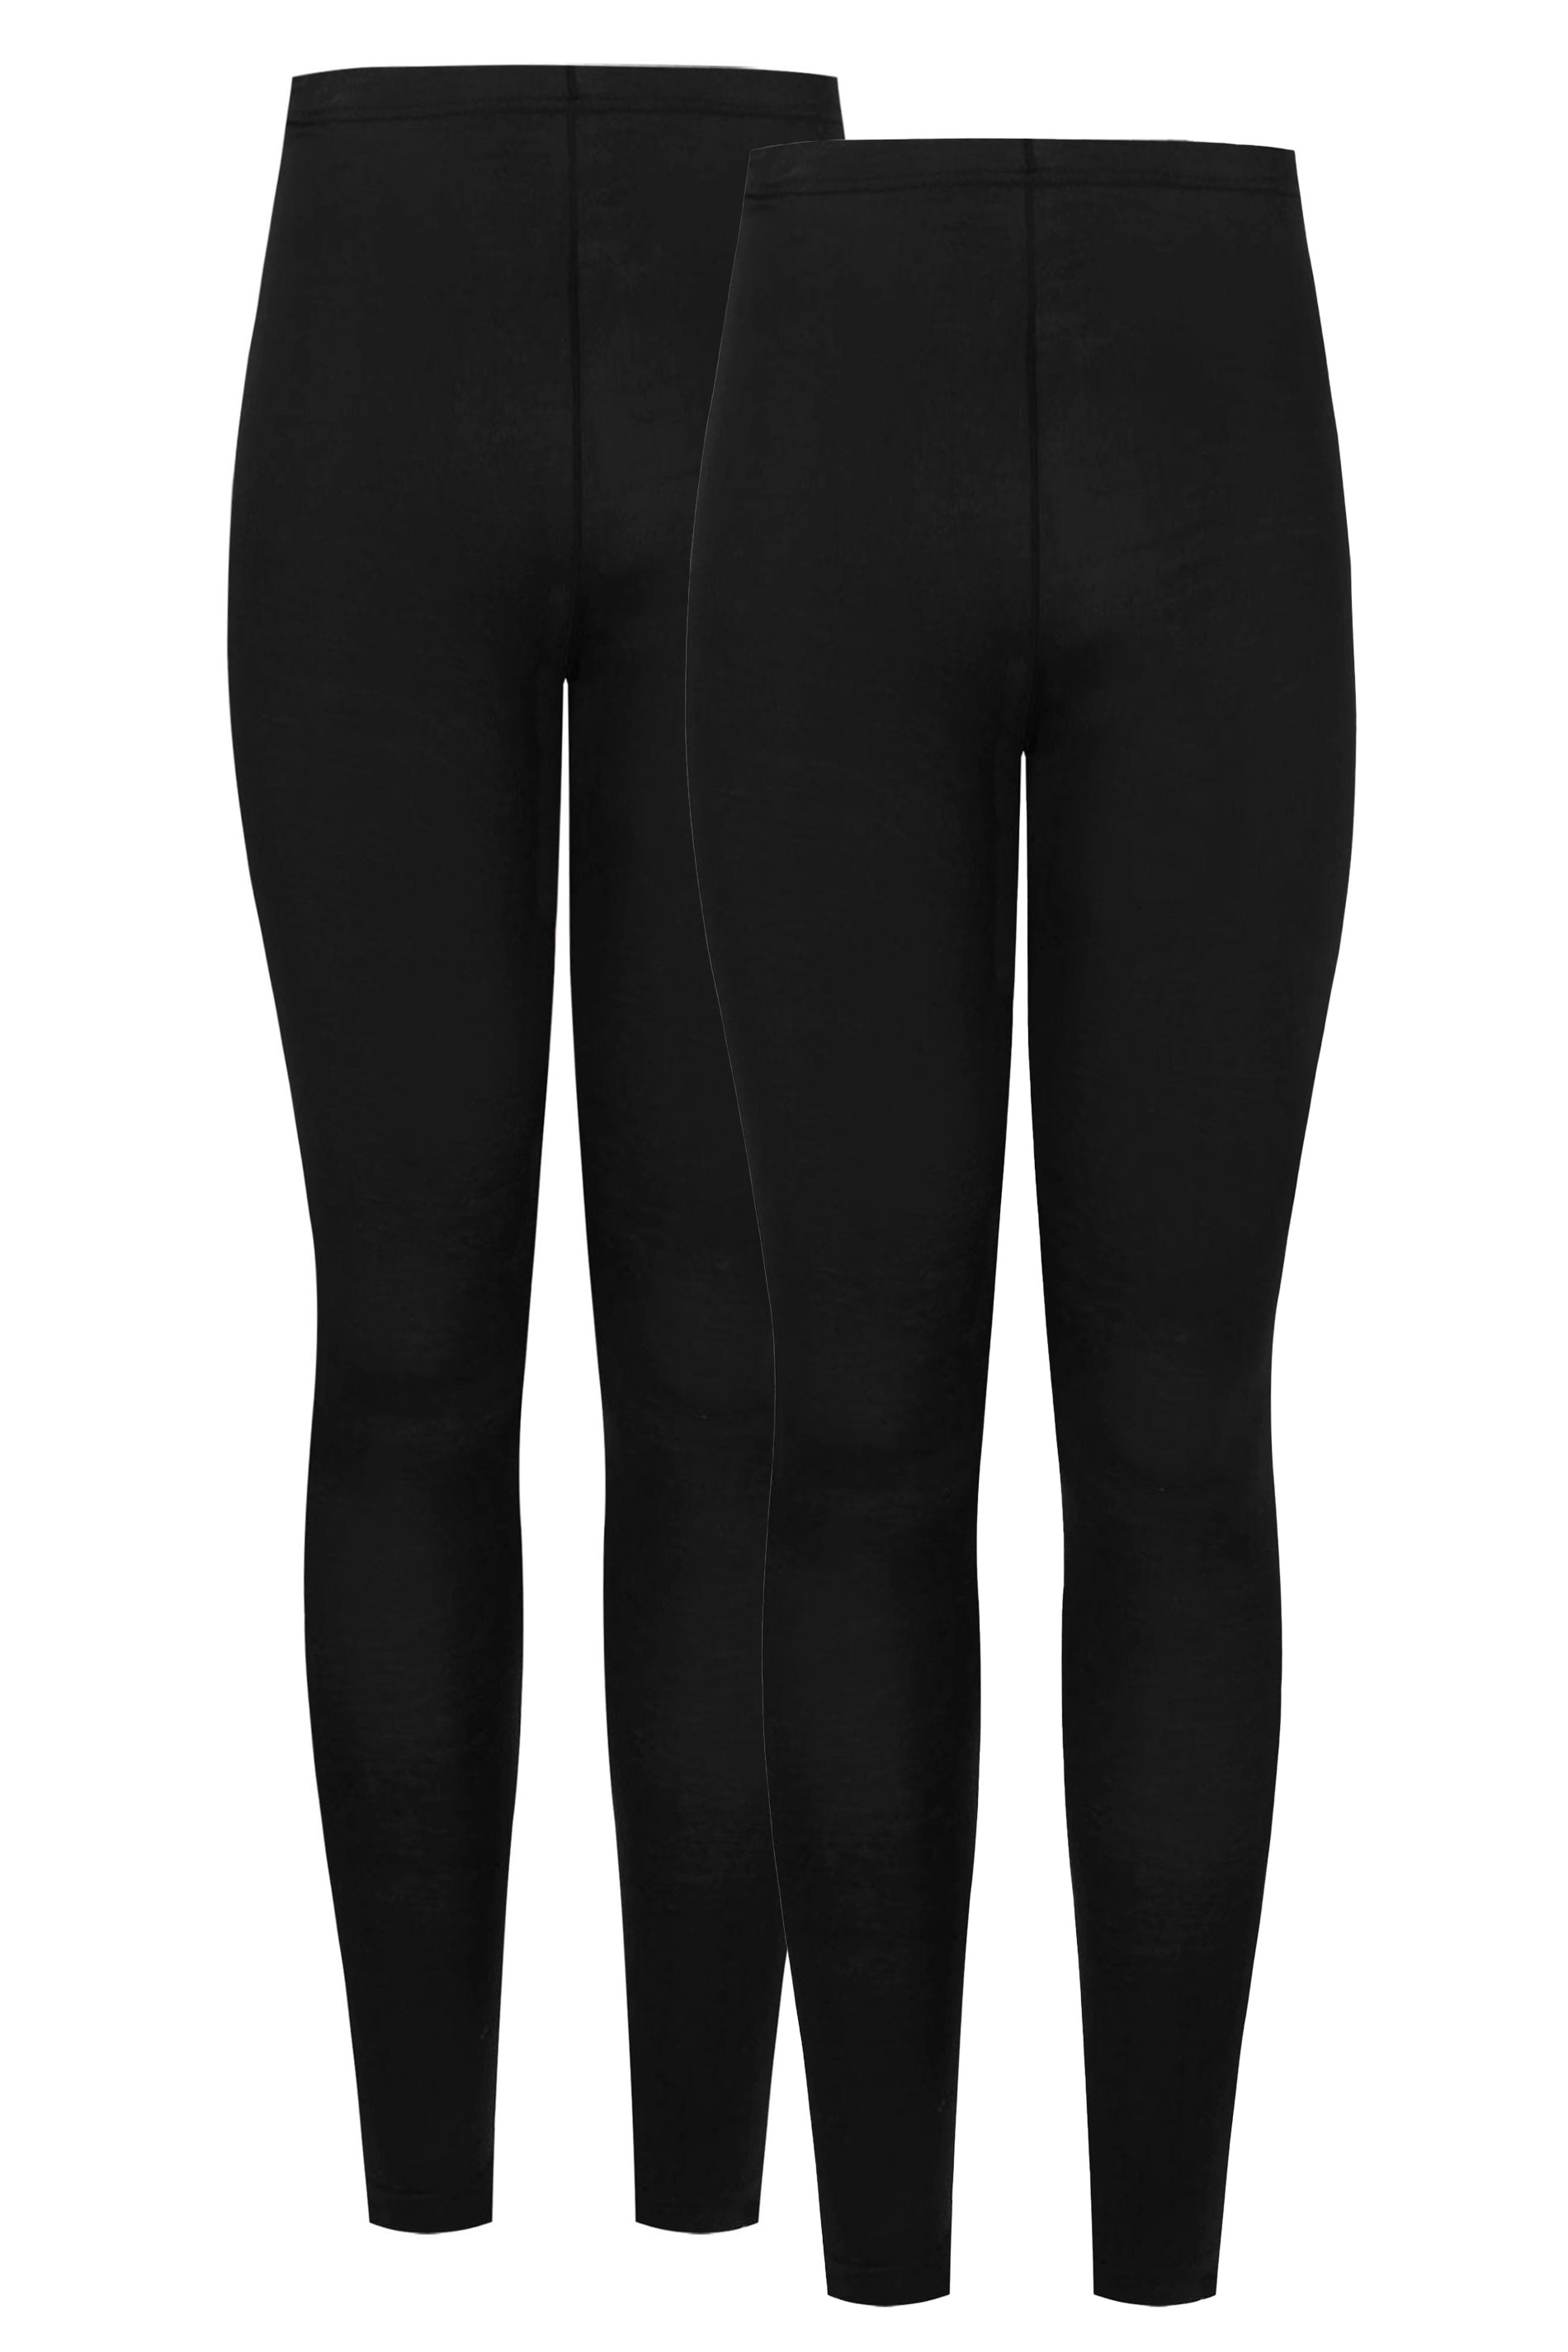 Organic Cotton Leggings For Women Uk  International Society of Precision  Agriculture